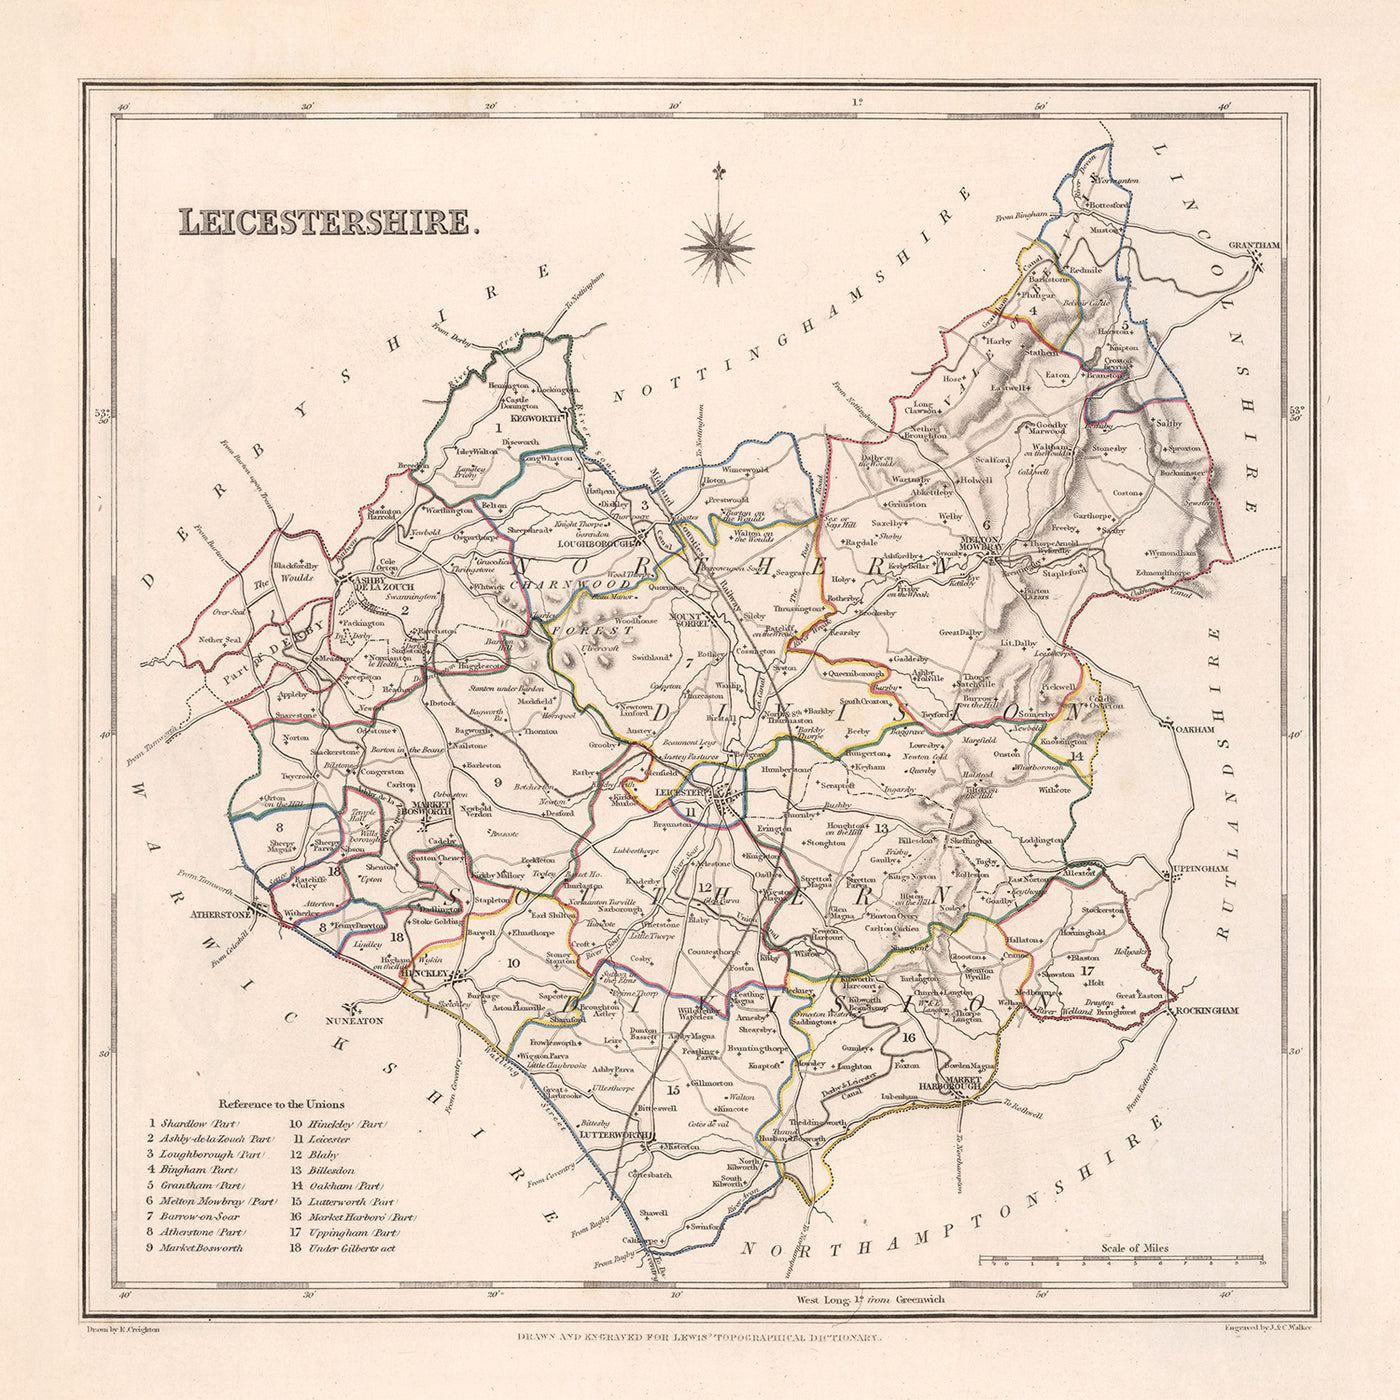 Old Map of Leicestershire by Samuel Lewis, 1844: Leicester, Melton Mowbray, Loughborough, Hinckley, Ashby-de-la-Zouch